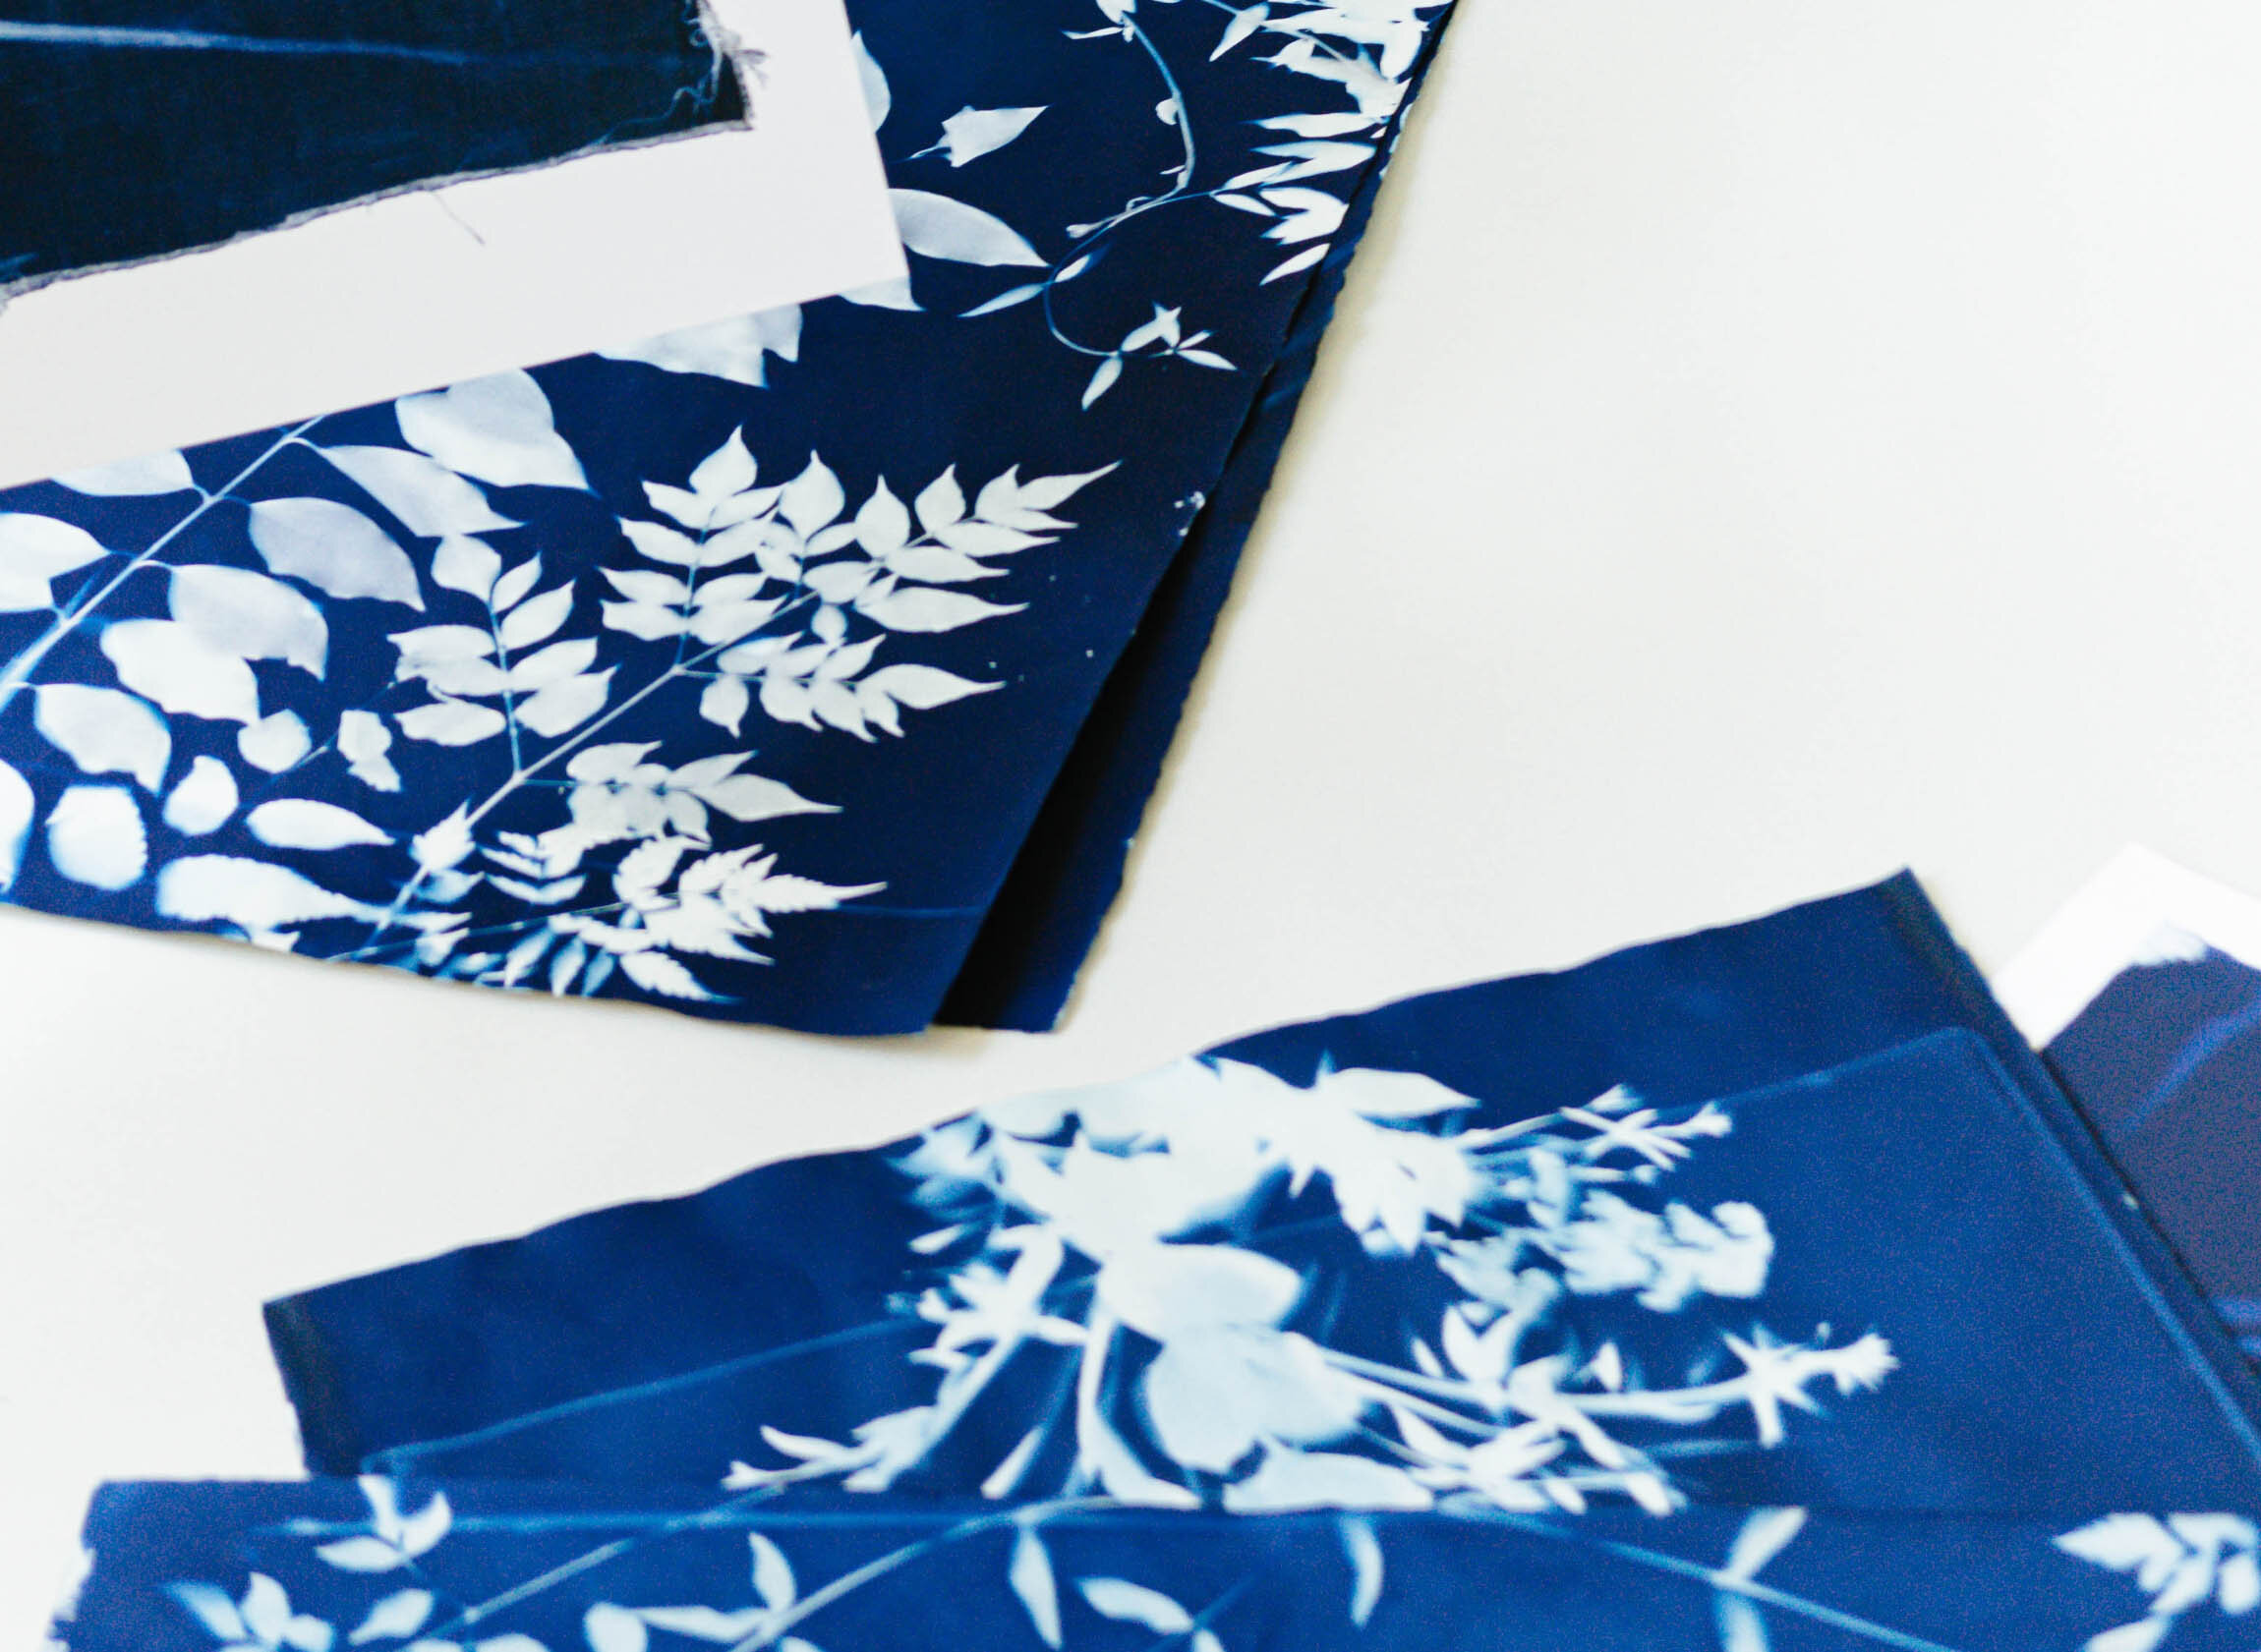 Creating With Cyanotypes